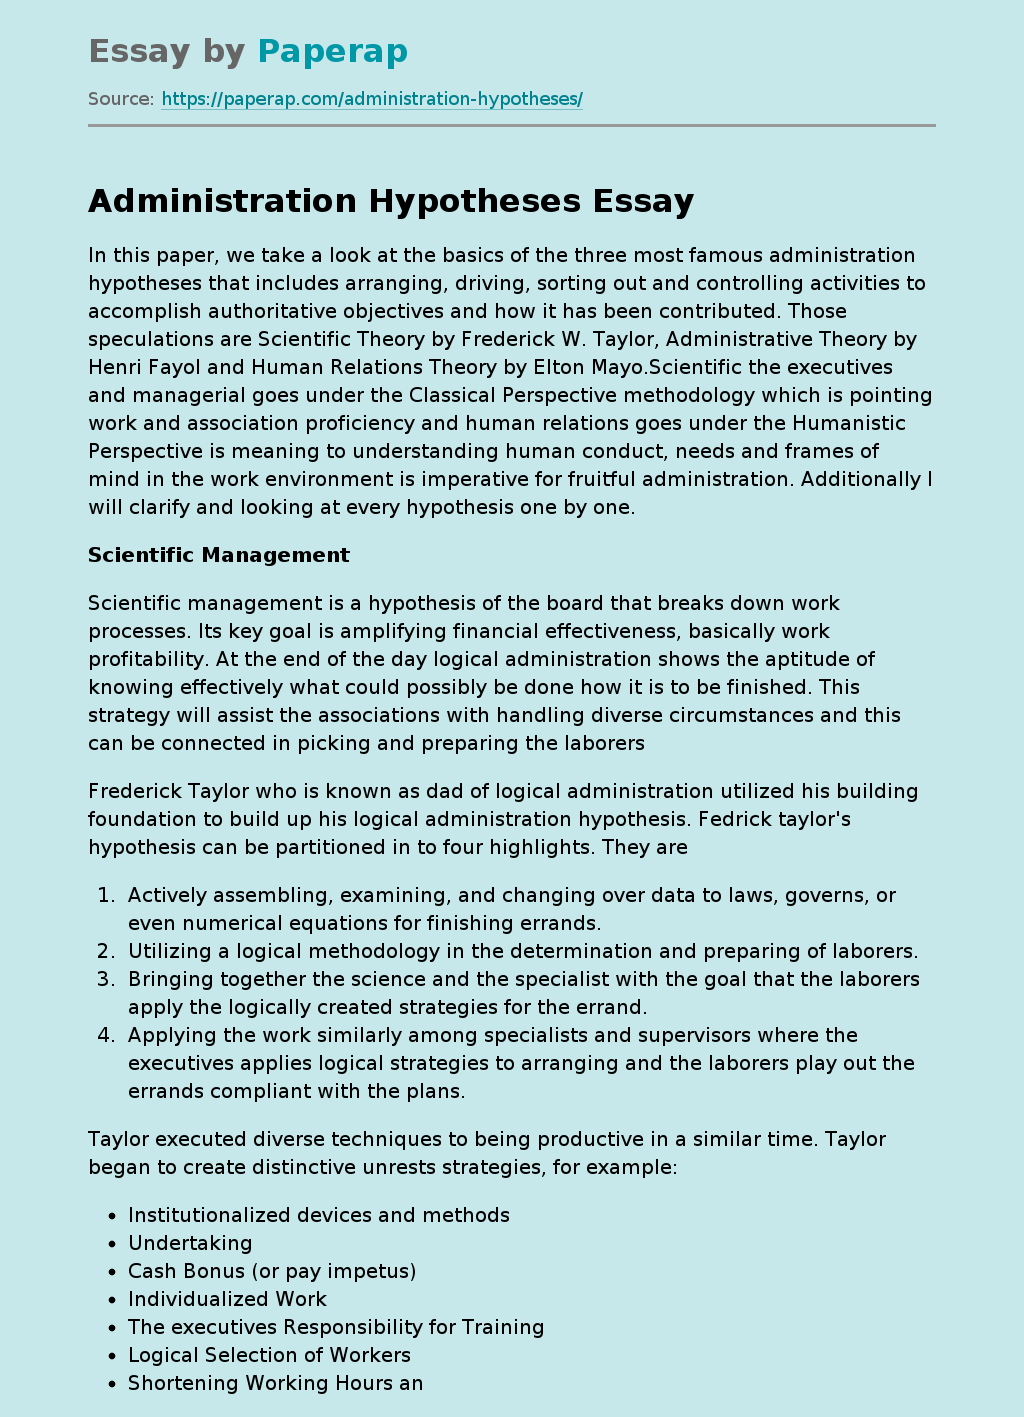 Administration Hypotheses